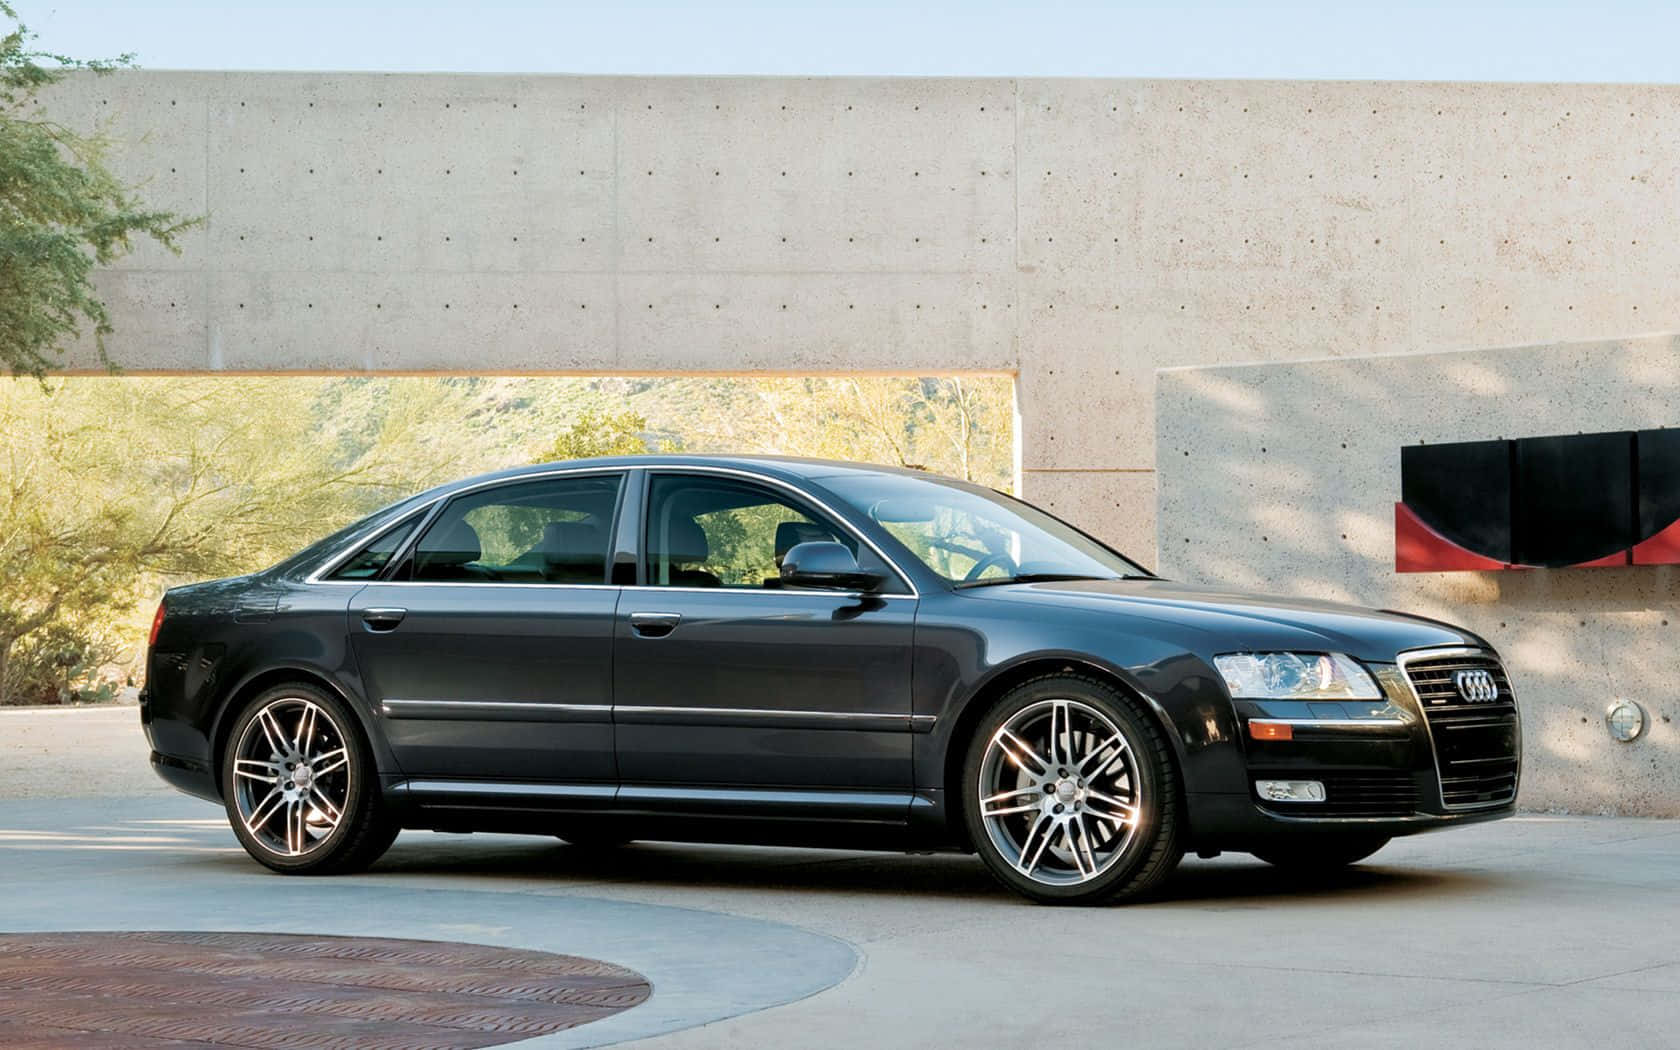 Sleek and powerful Audi S8 on the open road Wallpaper